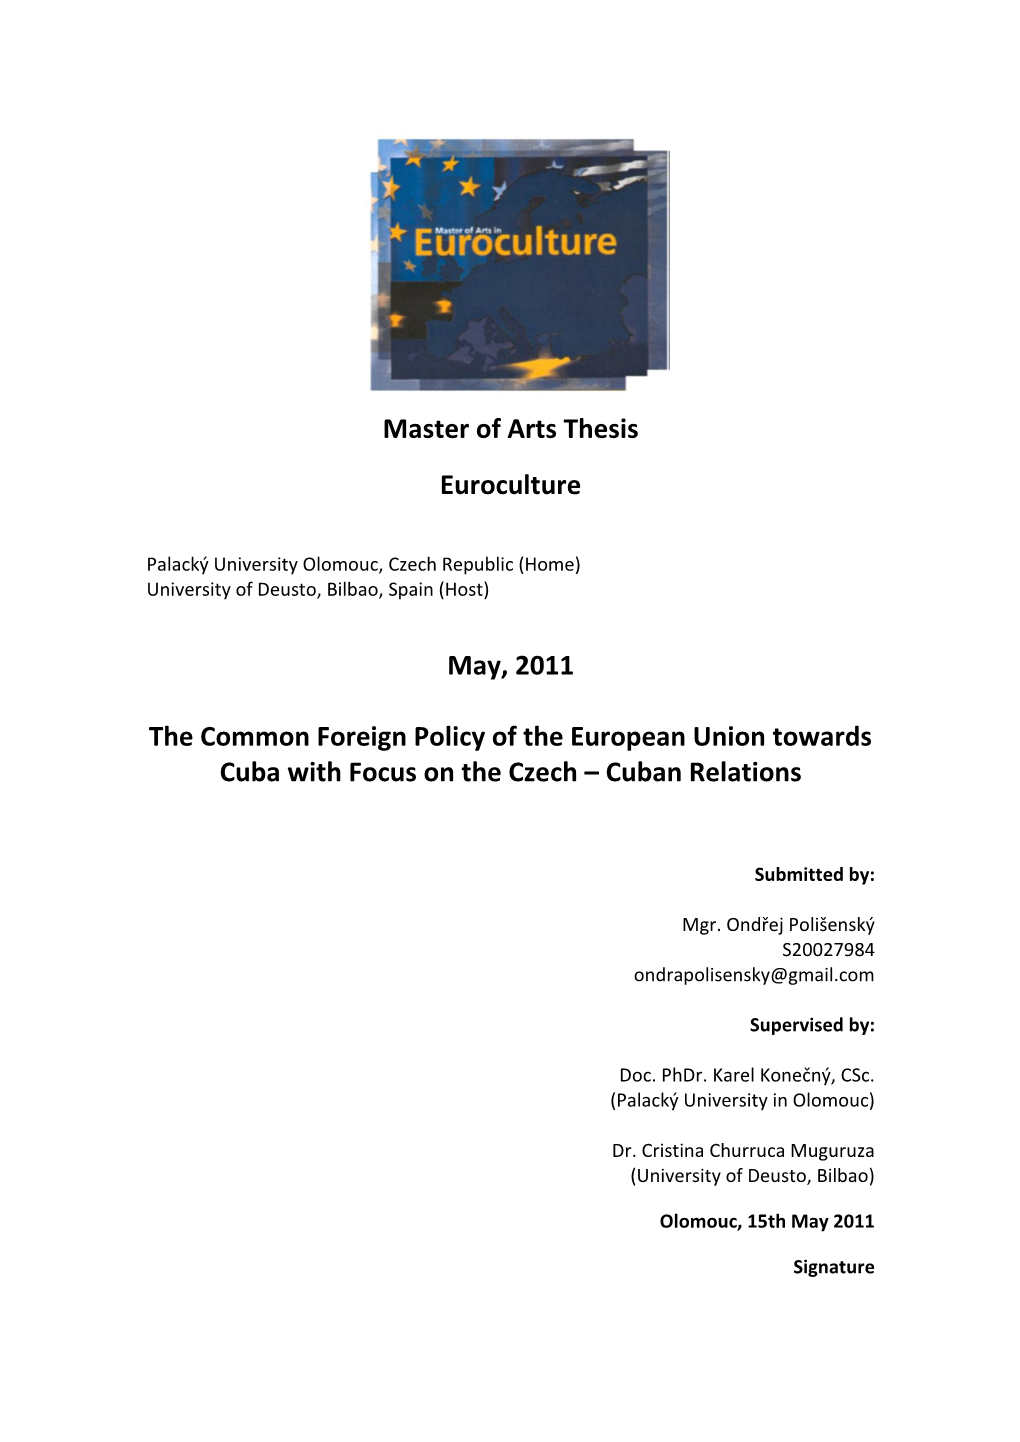 Master of Arts Thesis Euroculture May, 2011 the Common Foreign Policy of the European Union Towards Cuba with Focus on the Czech